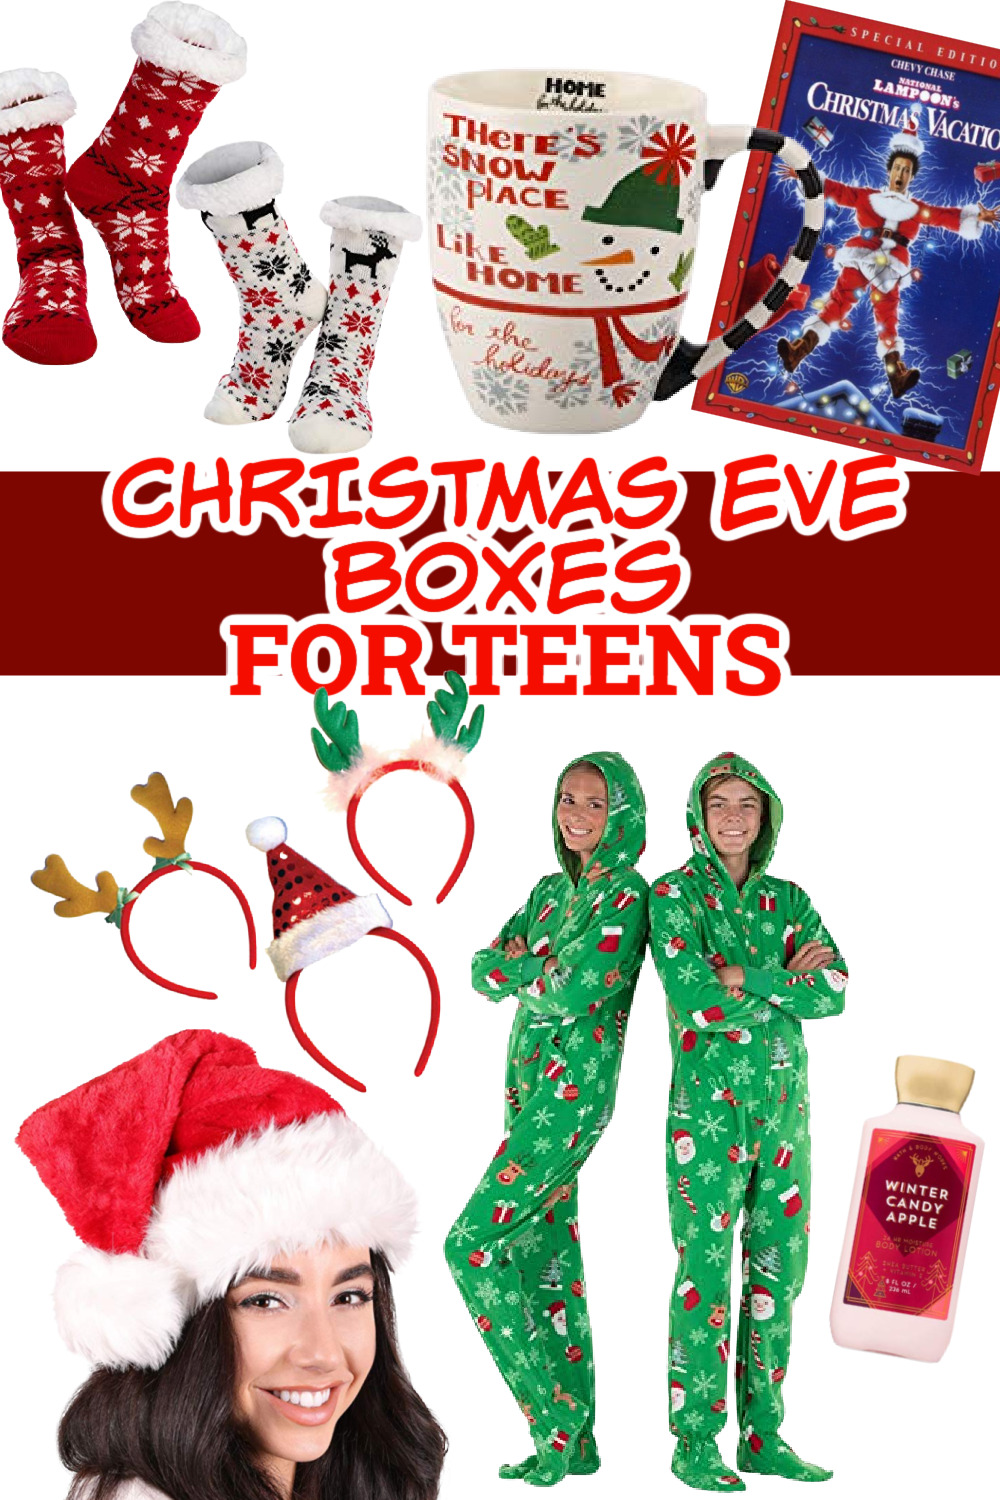 A collage of Christmas Eve Box gift Ideas for teens and teenagers.